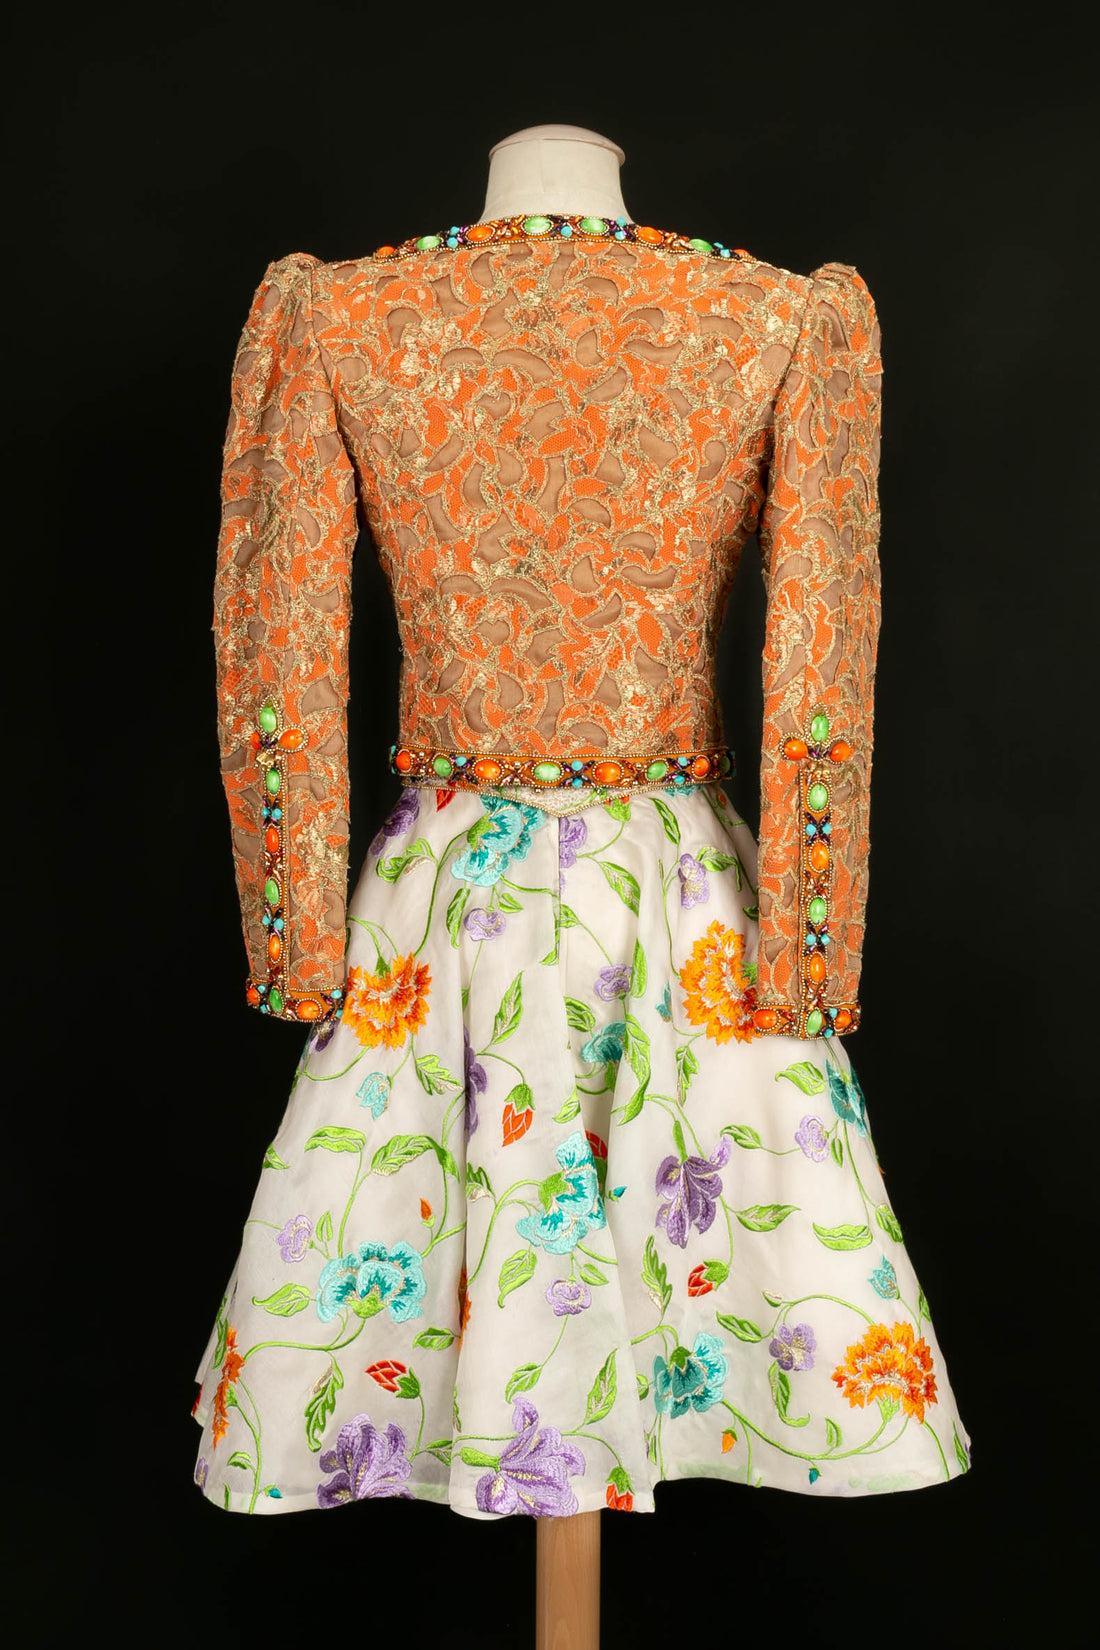 Ungaro Haute Embroidered with Flowers, Beads and Rhinestones Couture Set In Good Condition For Sale In SAINT-OUEN-SUR-SEINE, FR